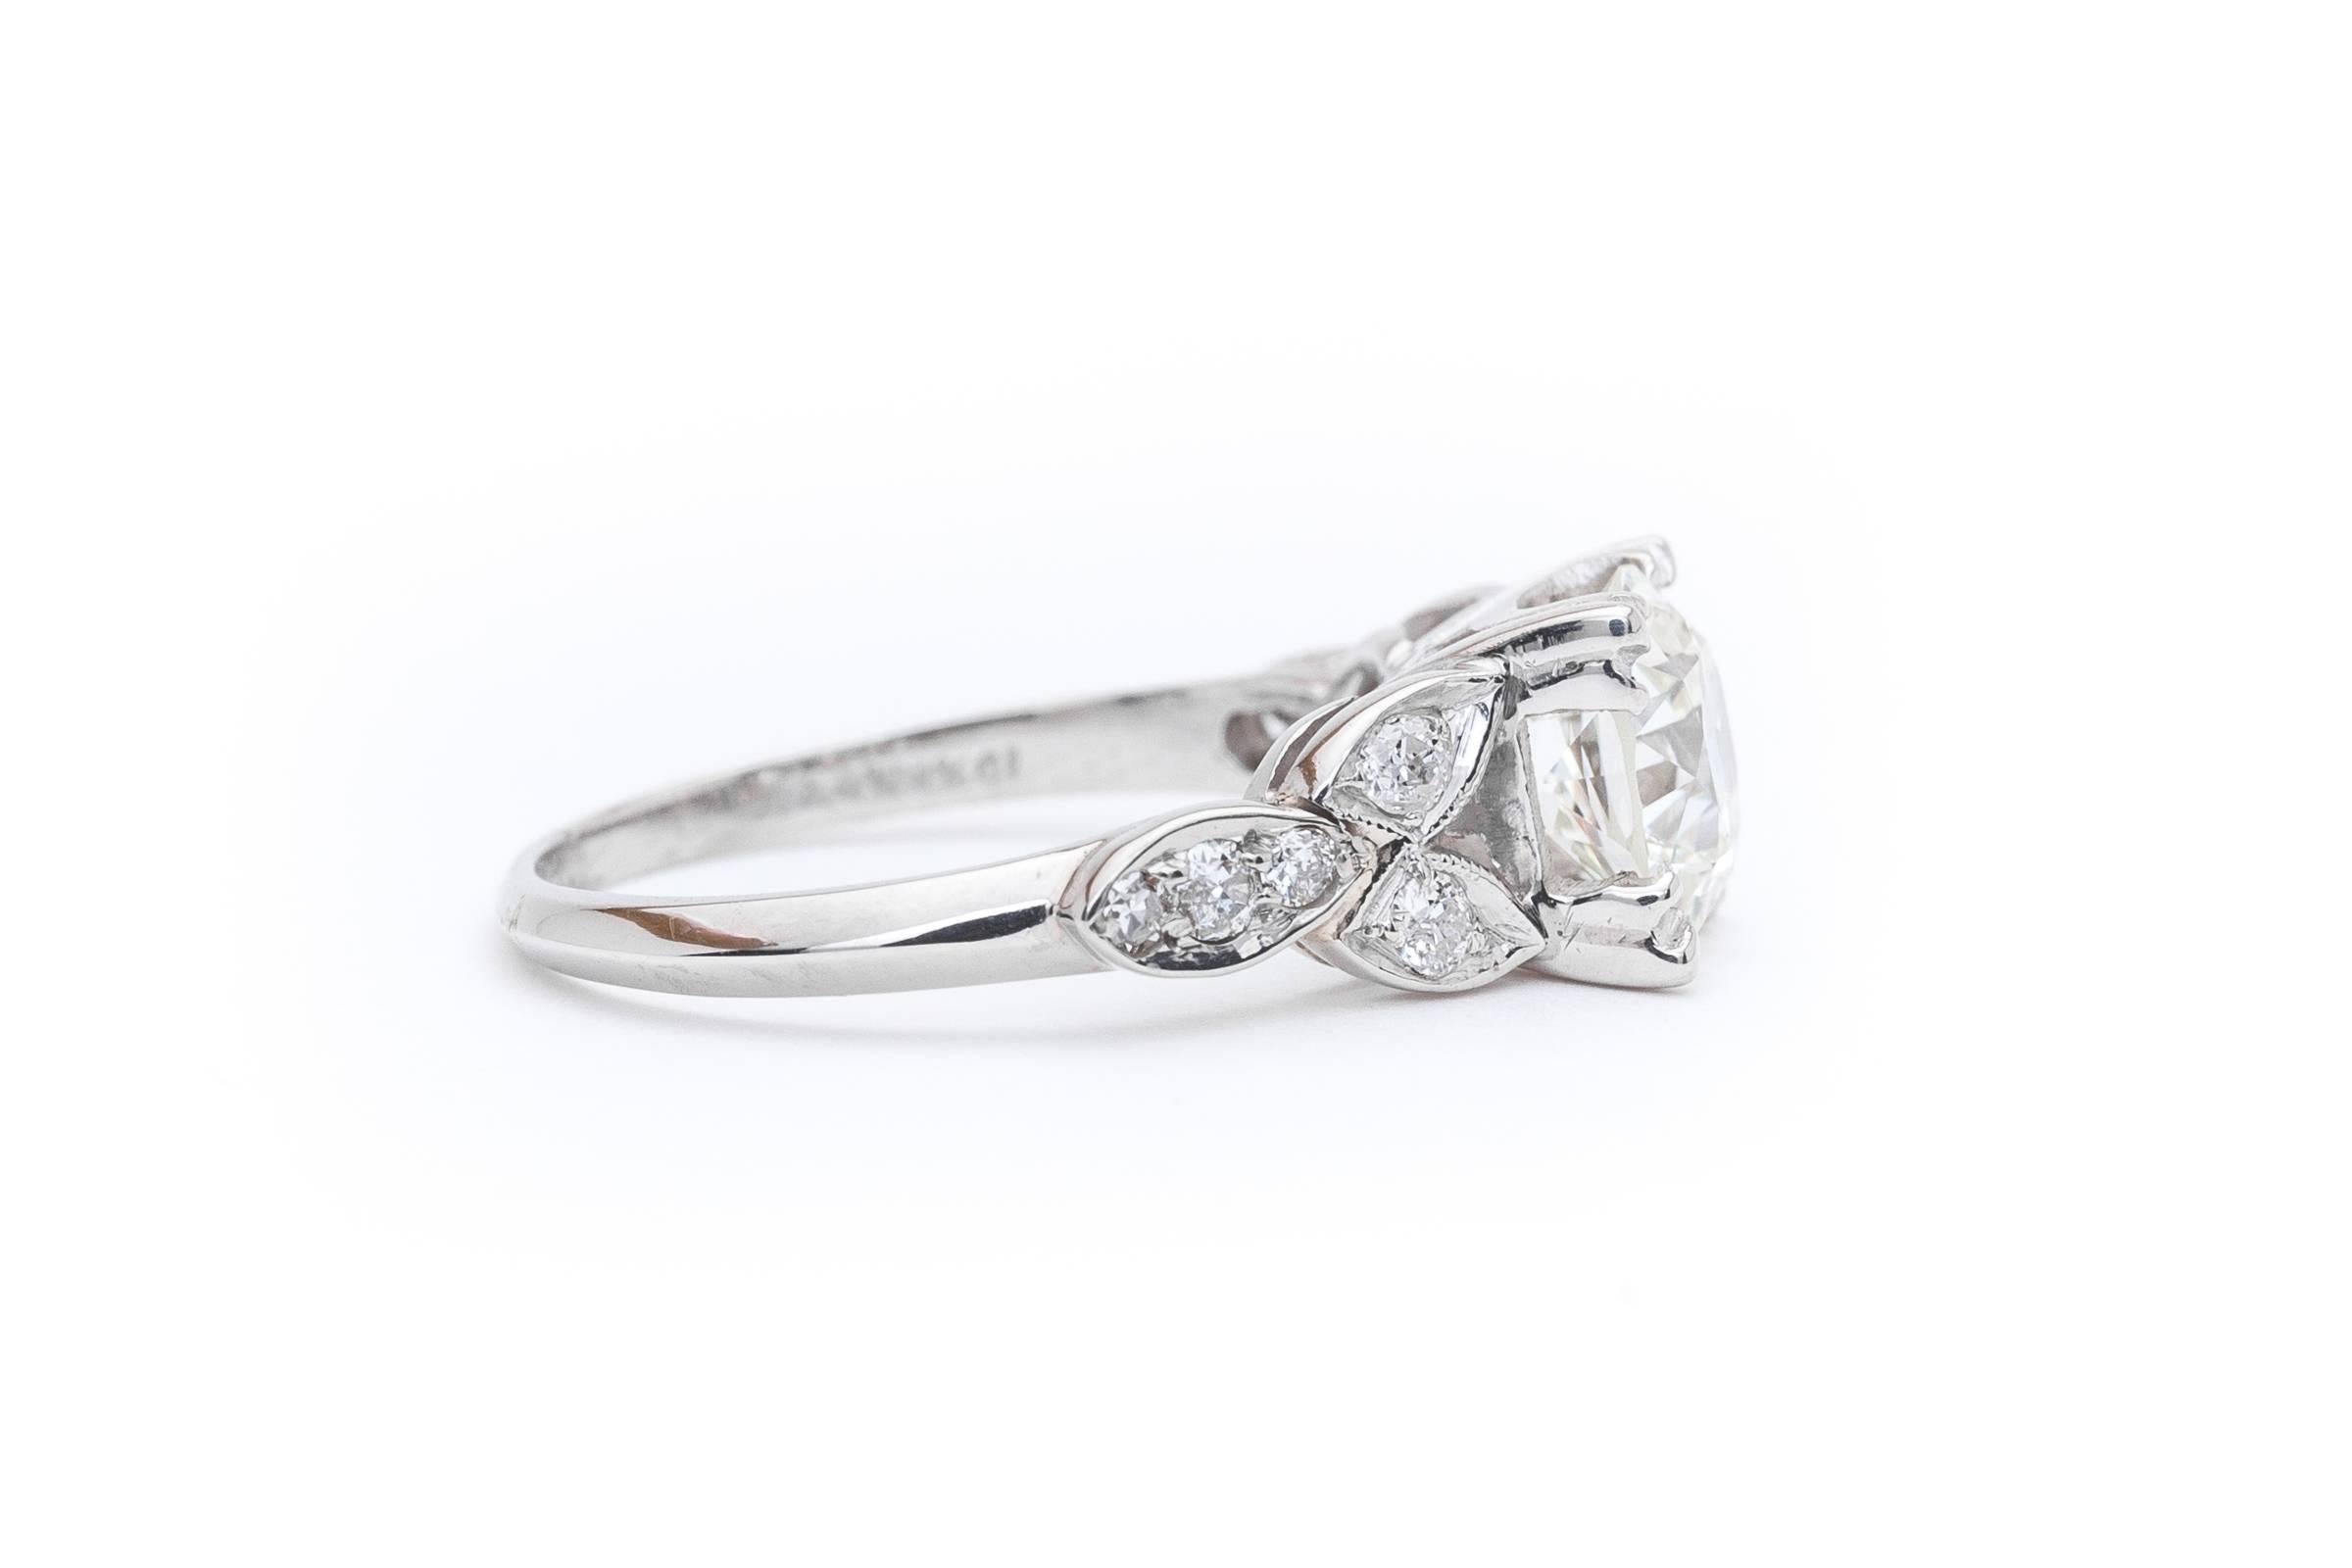 GIA Certified American 1.31 Carat Diamond Platinum Engagement Ring In Excellent Condition For Sale In Boston, MA